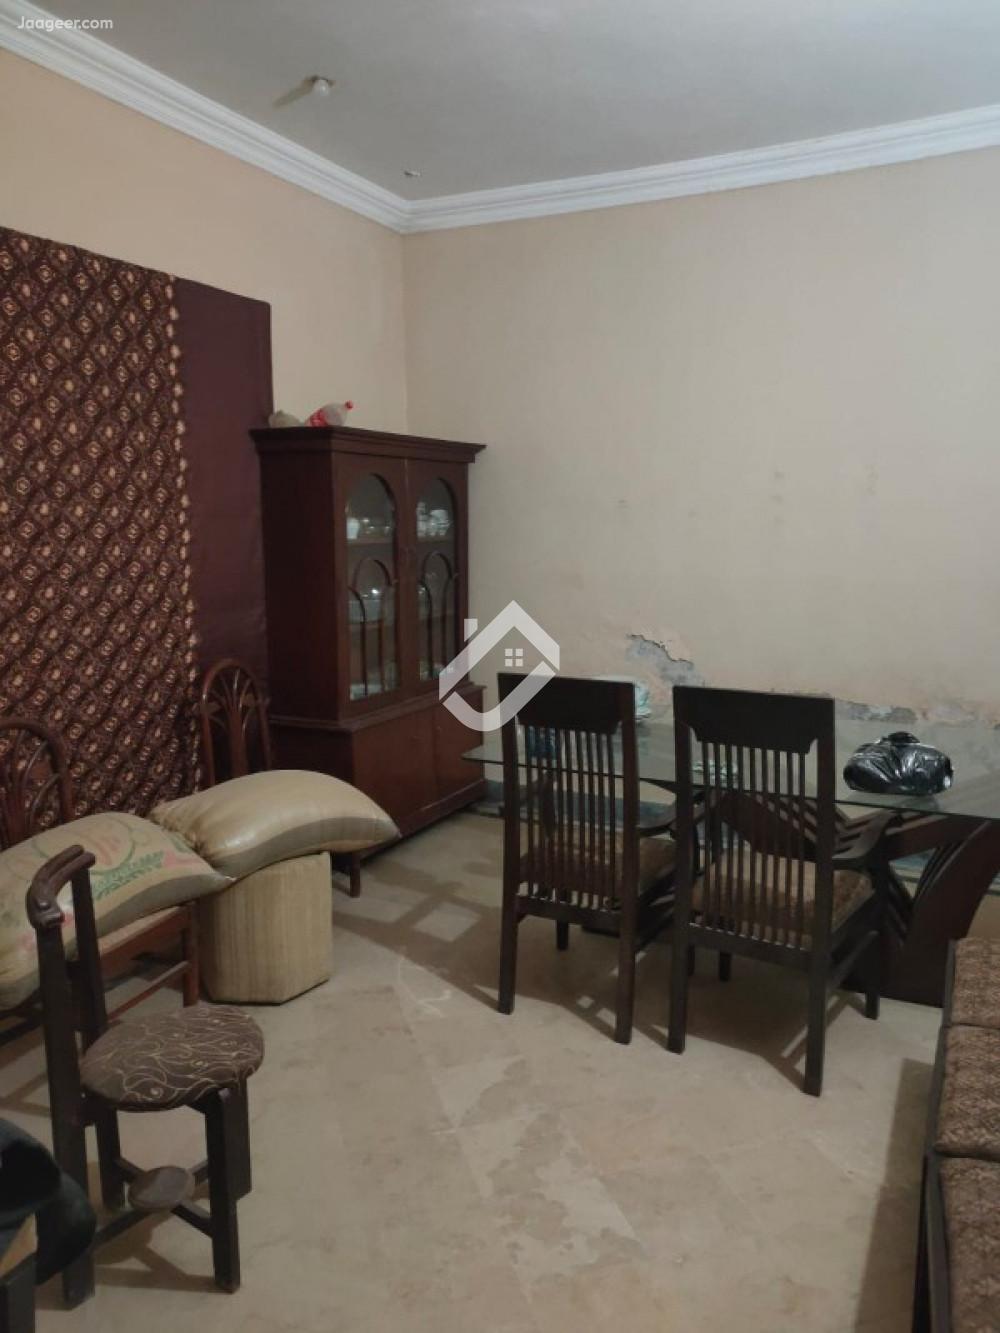 6.25 Marla House For Sale In Old Satellite Town Block-A Canal Road Main Street Of Shamsher Town in Old Satellite Town, Sargodha